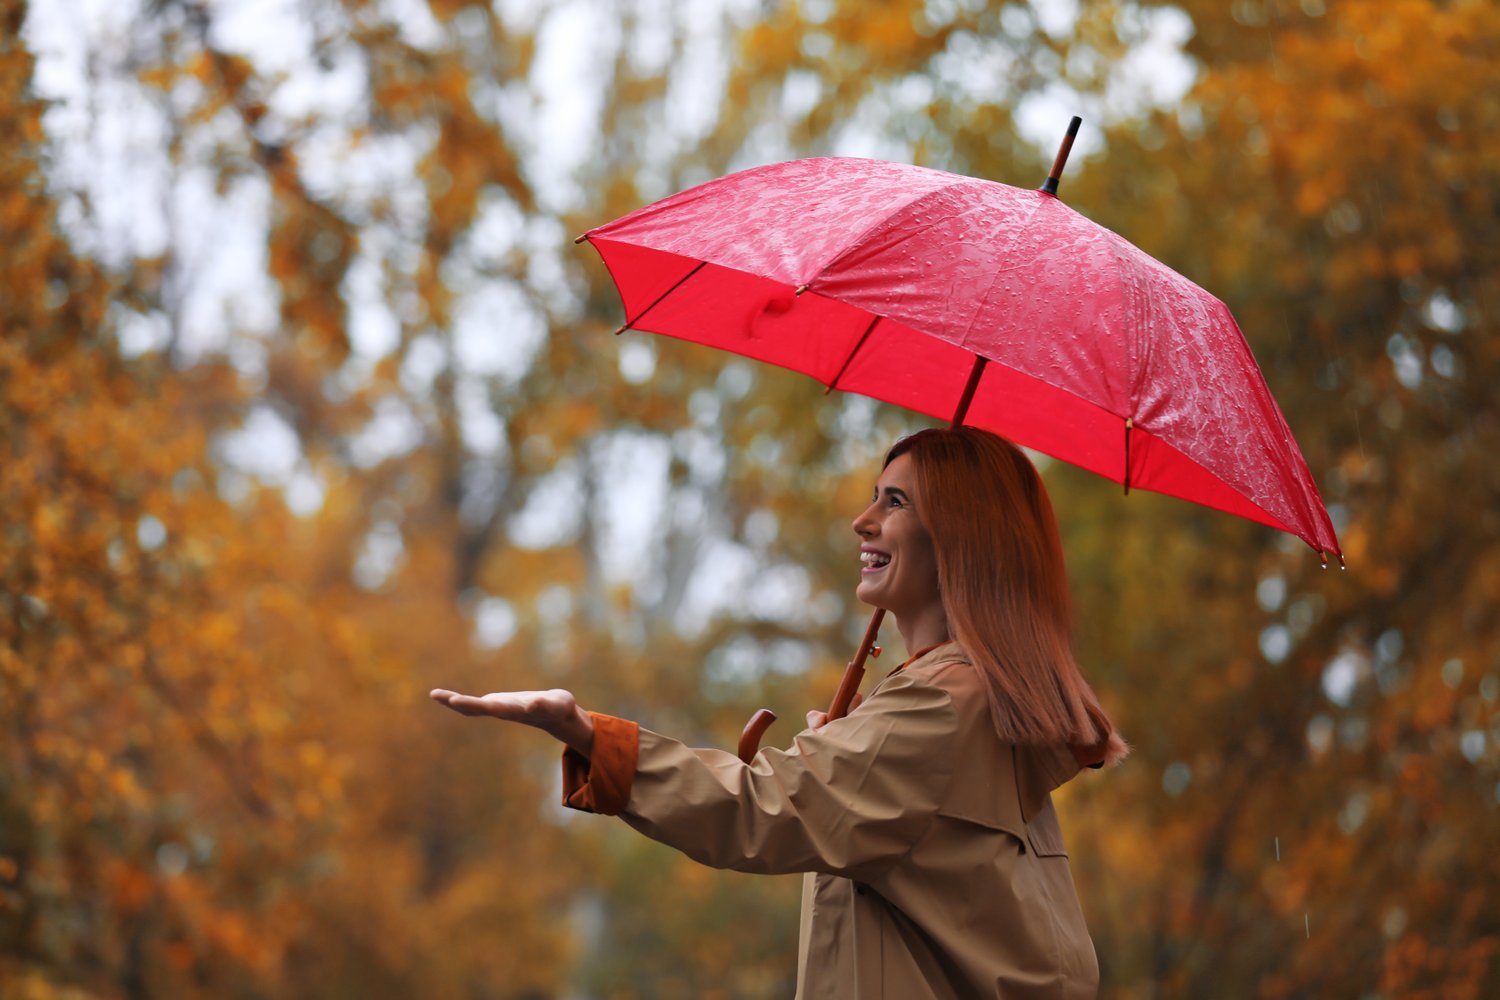 Photo of woman with umbrella in autumn park on rainy day